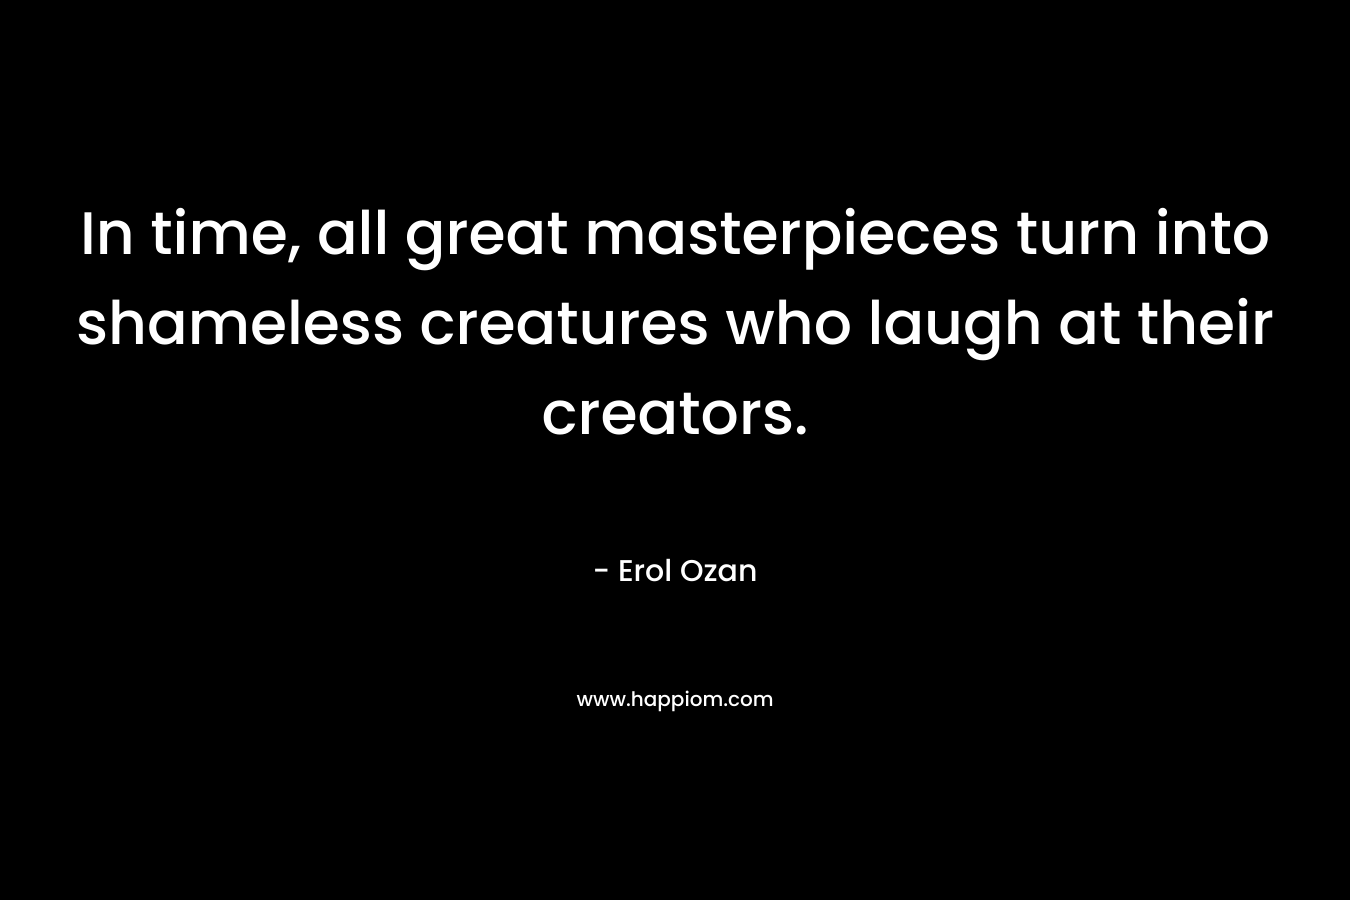 In time, all great masterpieces turn into shameless creatures who laugh at their creators. – Erol Ozan